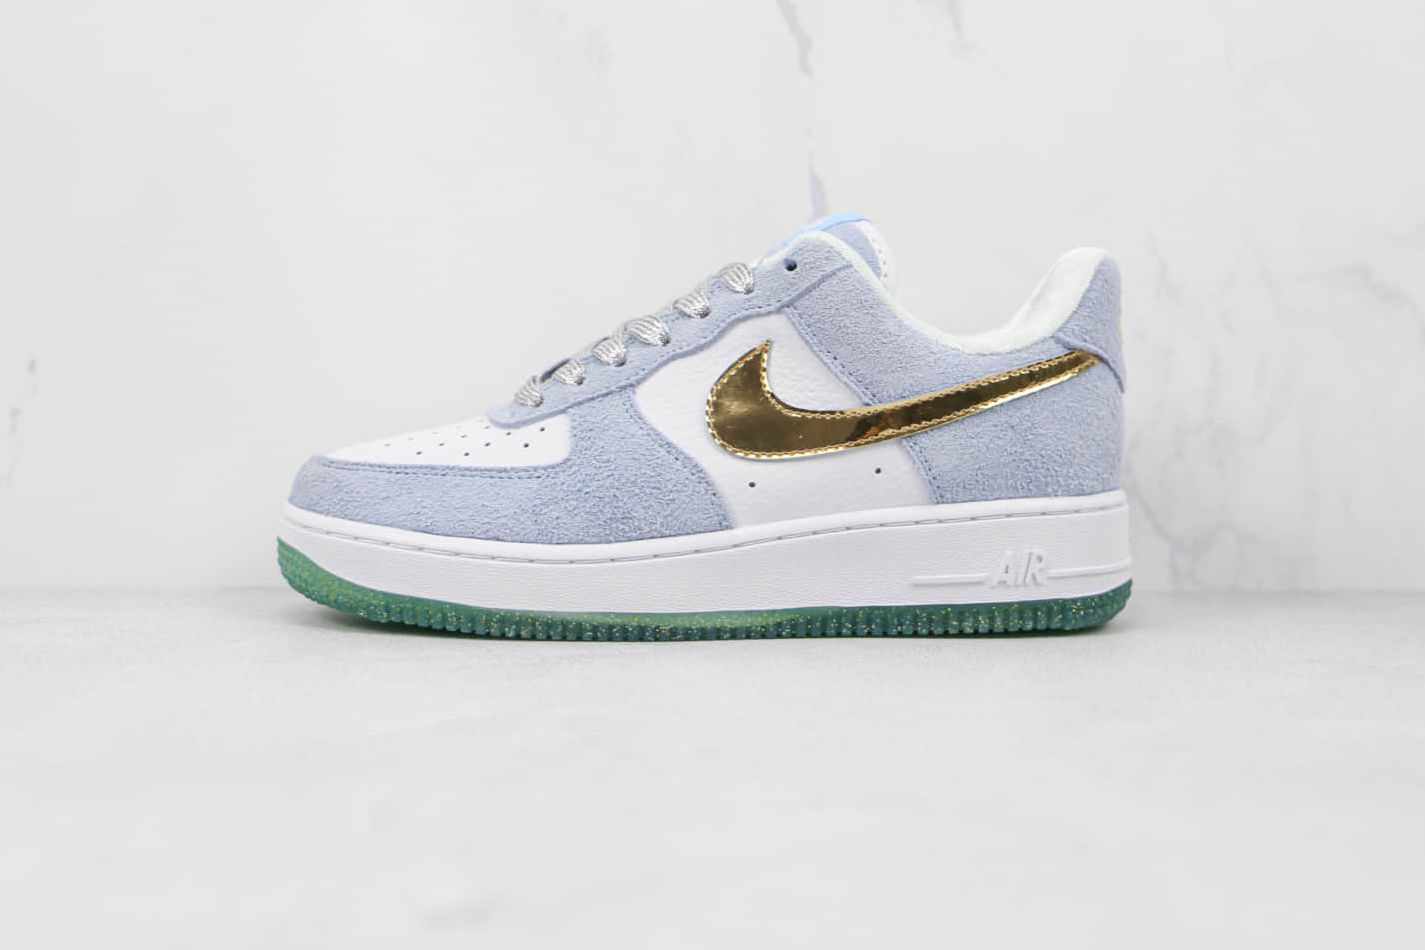 Nike Air Force 1 07 Low Grey Green Metallic Gold CW1577-001 available now